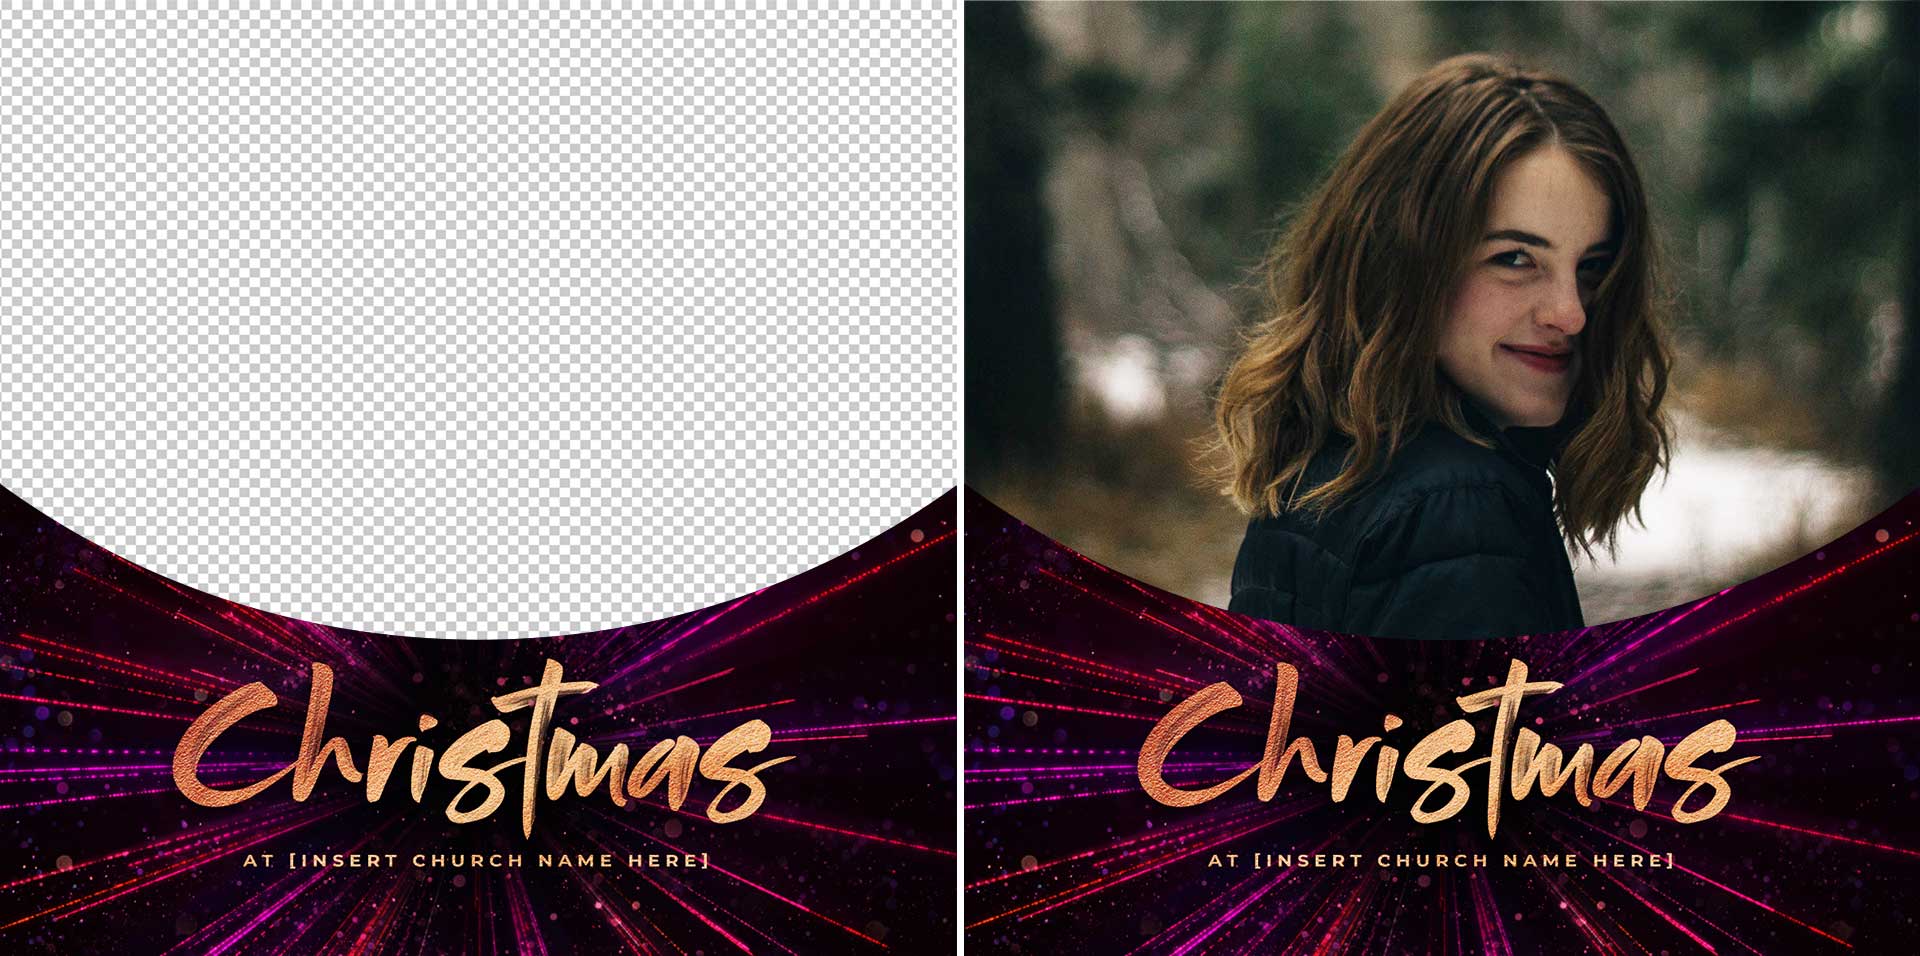 3-free-glitter-bliss-christmas-facebook-profile-frames-cmg-church-motion-graphics